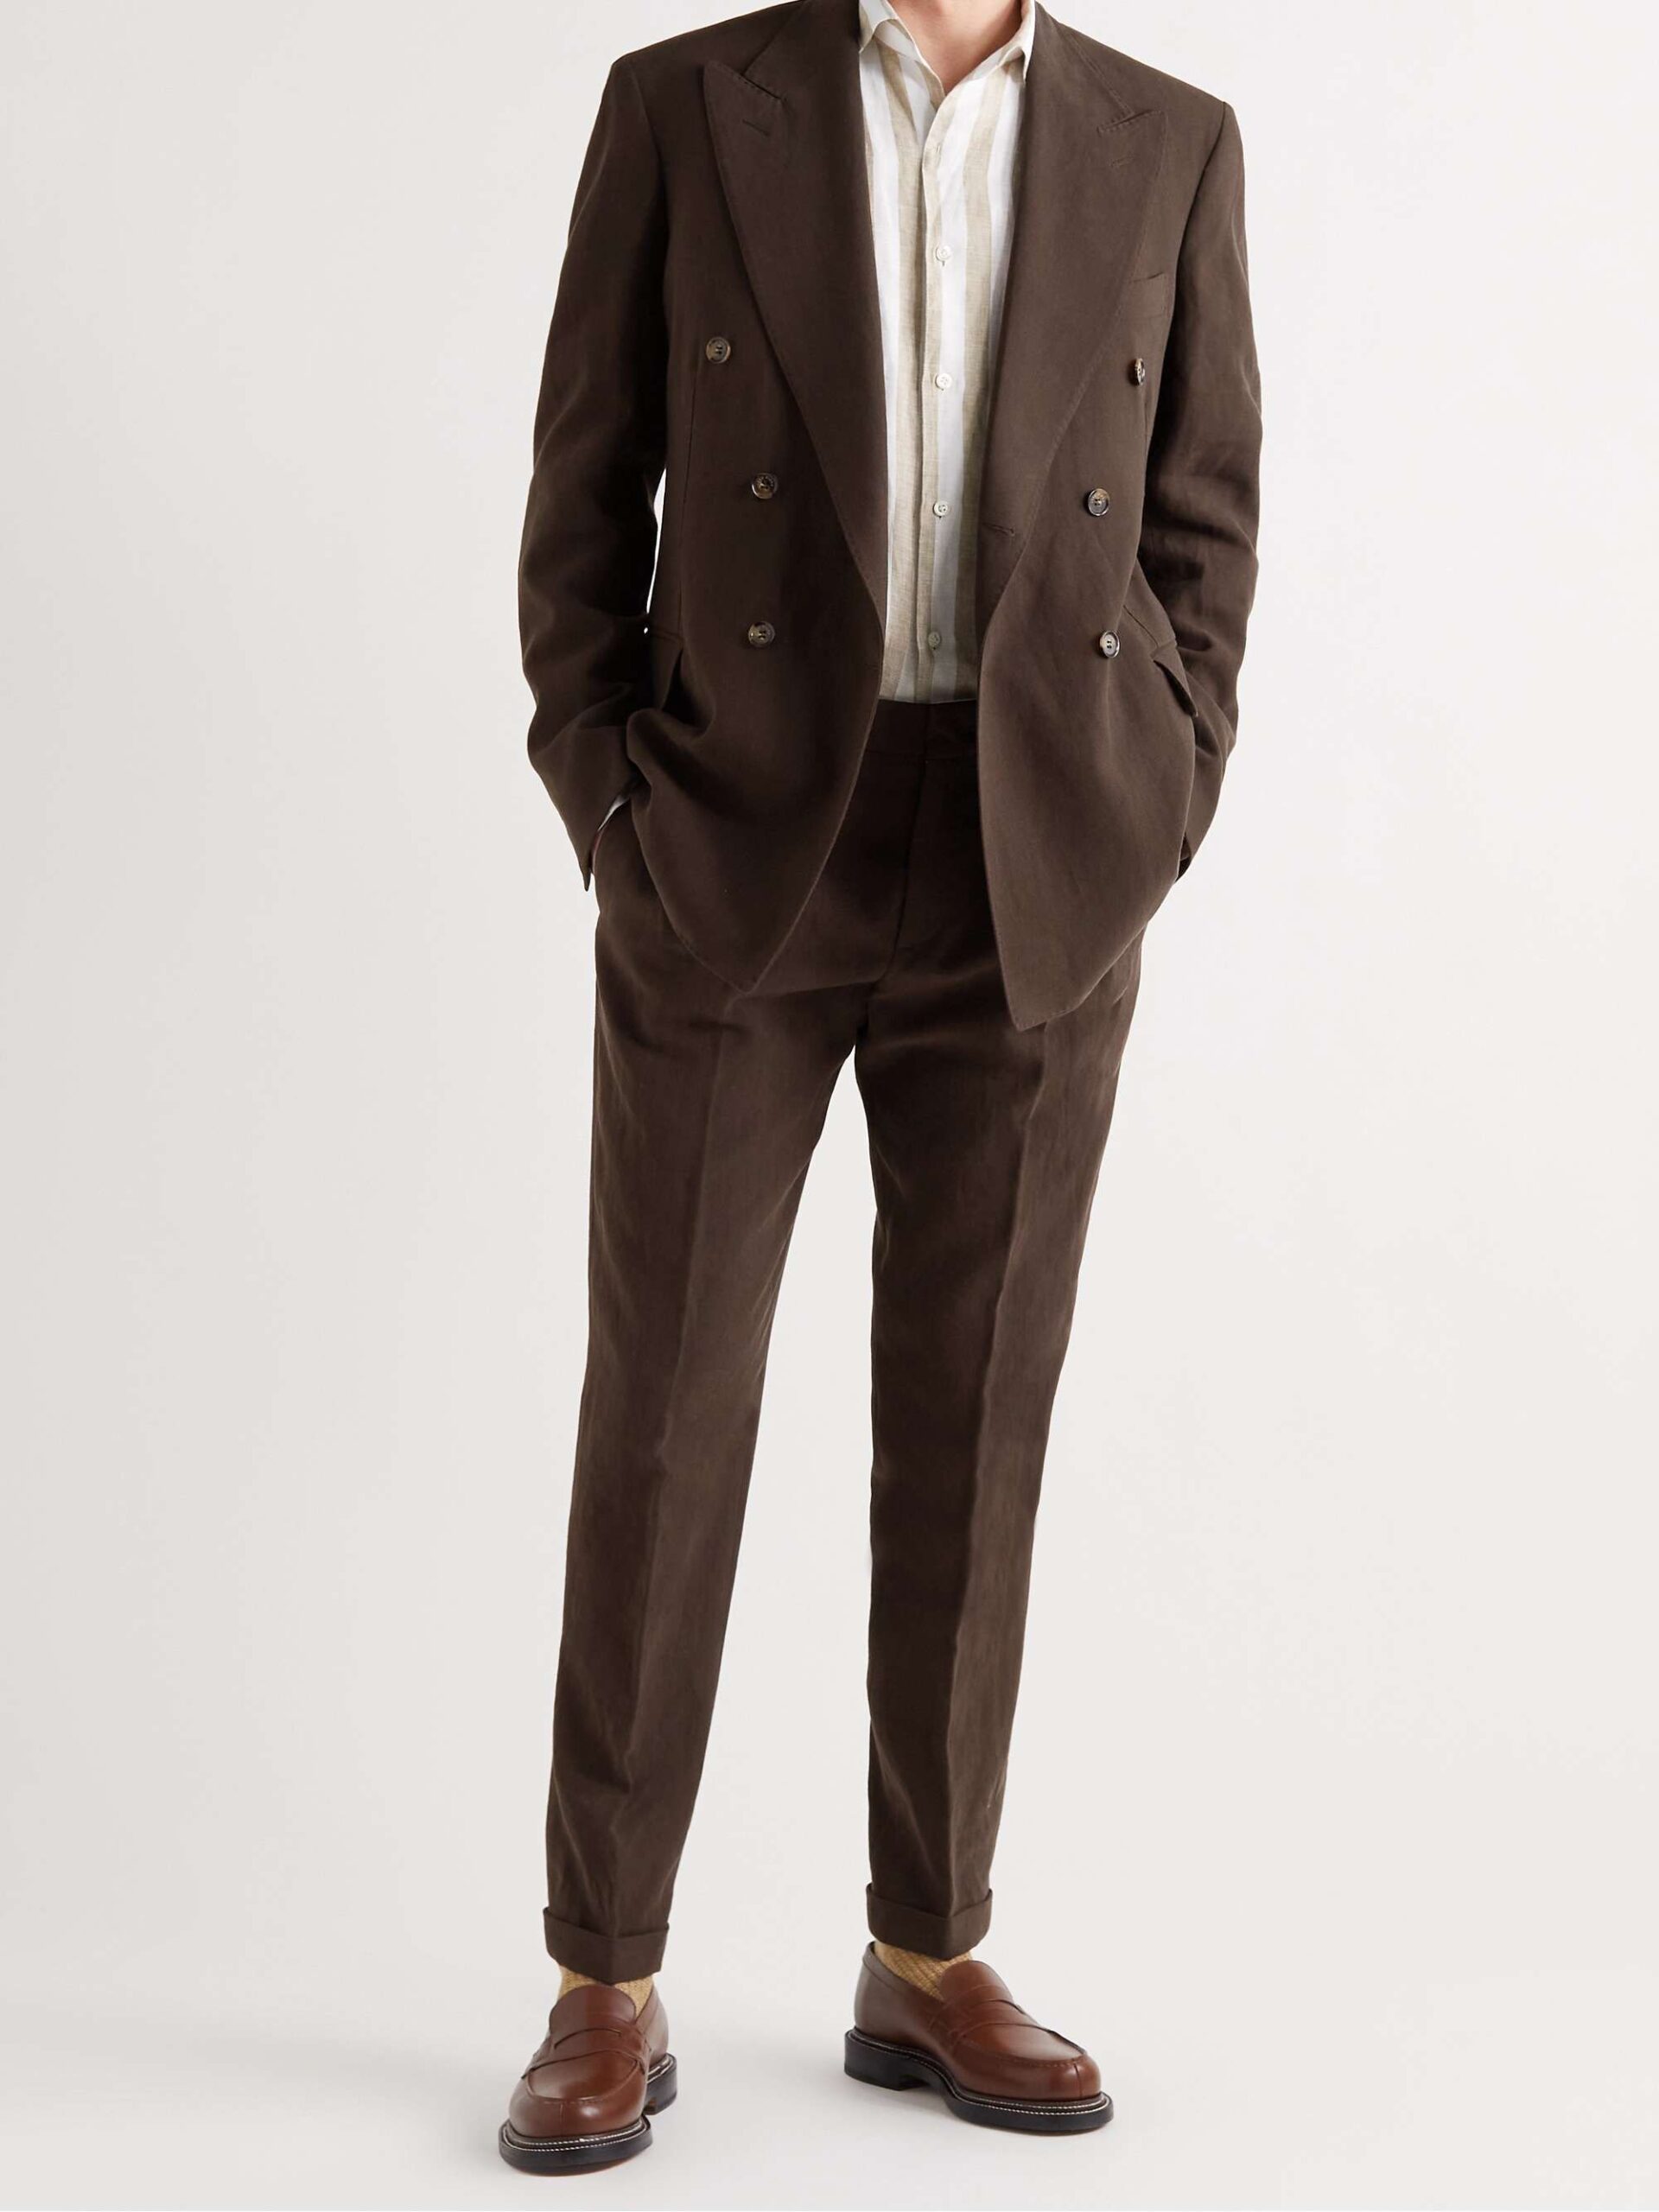 Getting the right fit for your slim fit
suit